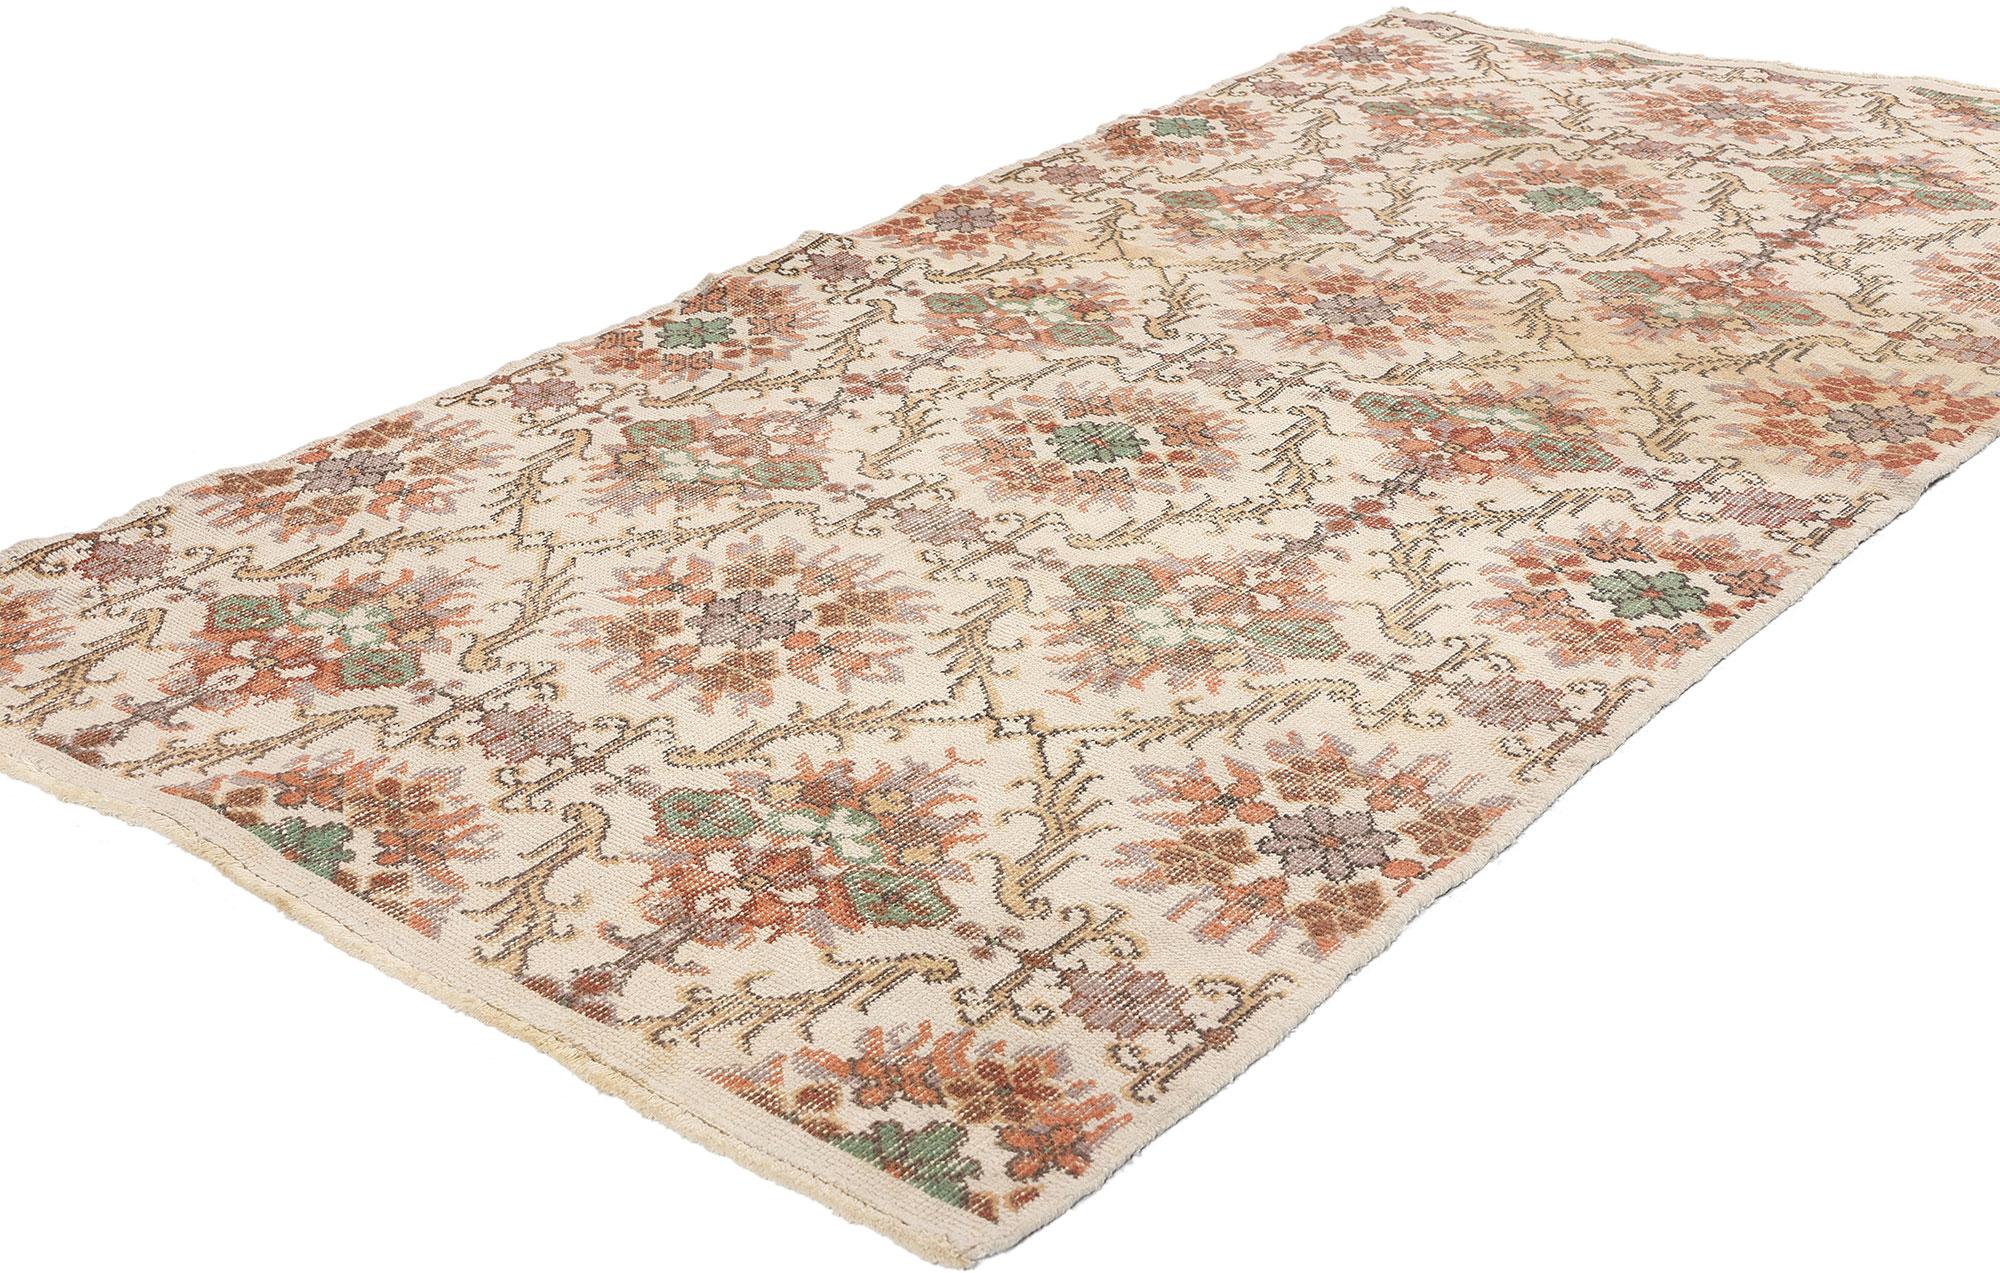 51944 Distressed Vintage Turkish Sivas Rug, 03'08 x 07'01. Distressed Turkish Sivas rugs hail from Sivas in central Anatolia, Turkey, rooted in tradition and authenticity. These rugs undergo deliberate aging processes, including distressing, to